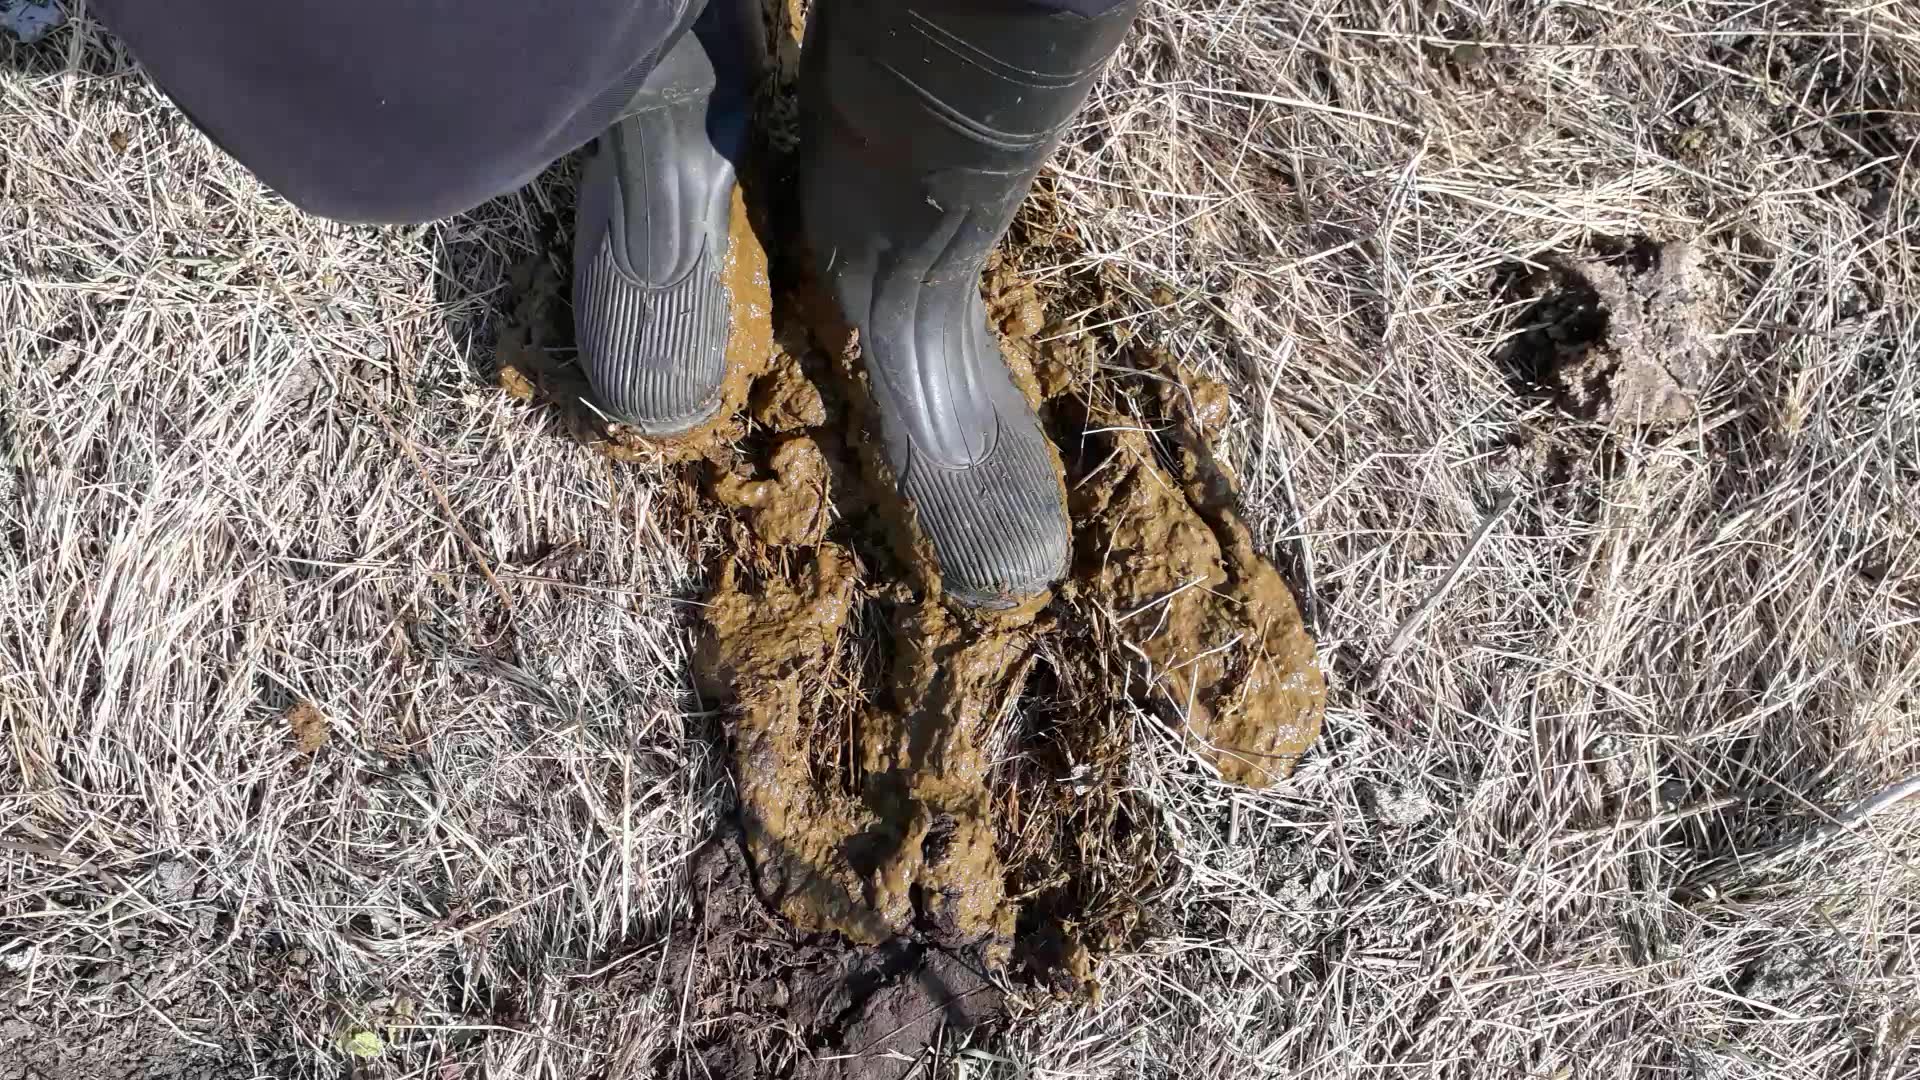 Rubber boots vs cowshit - video 11